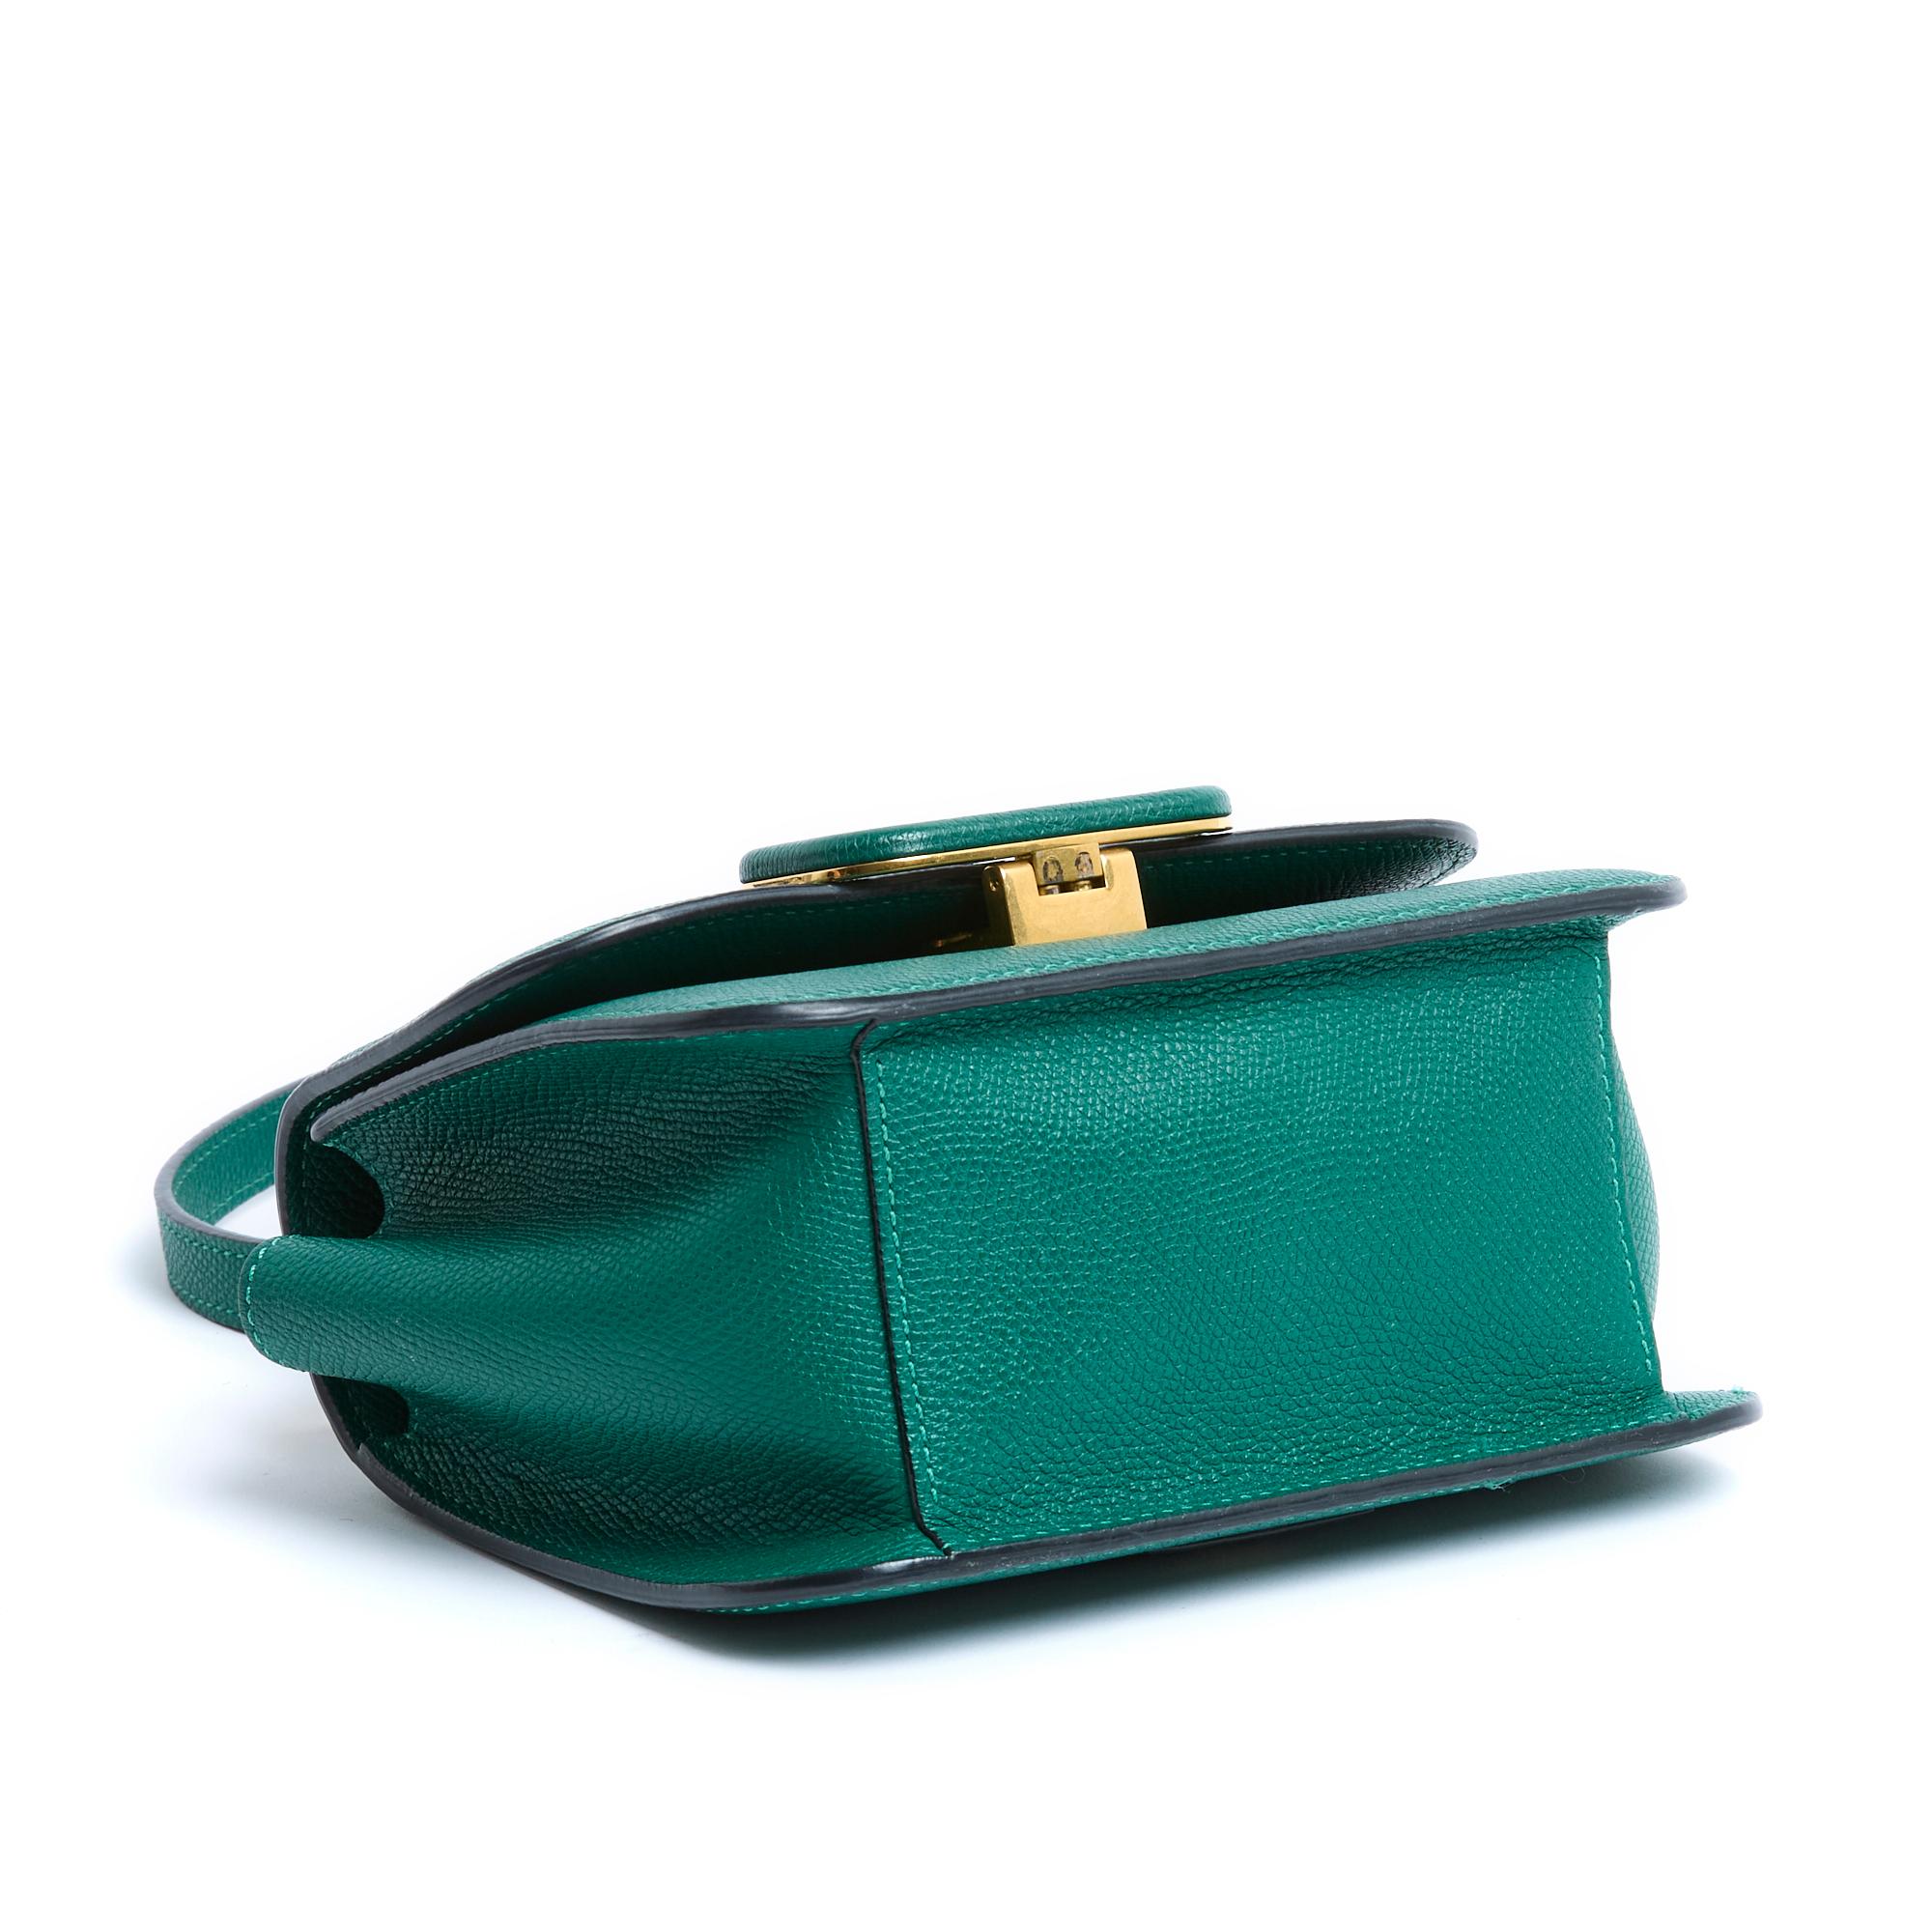 2020 Valentino VLogo green leather small bag For Sale 1